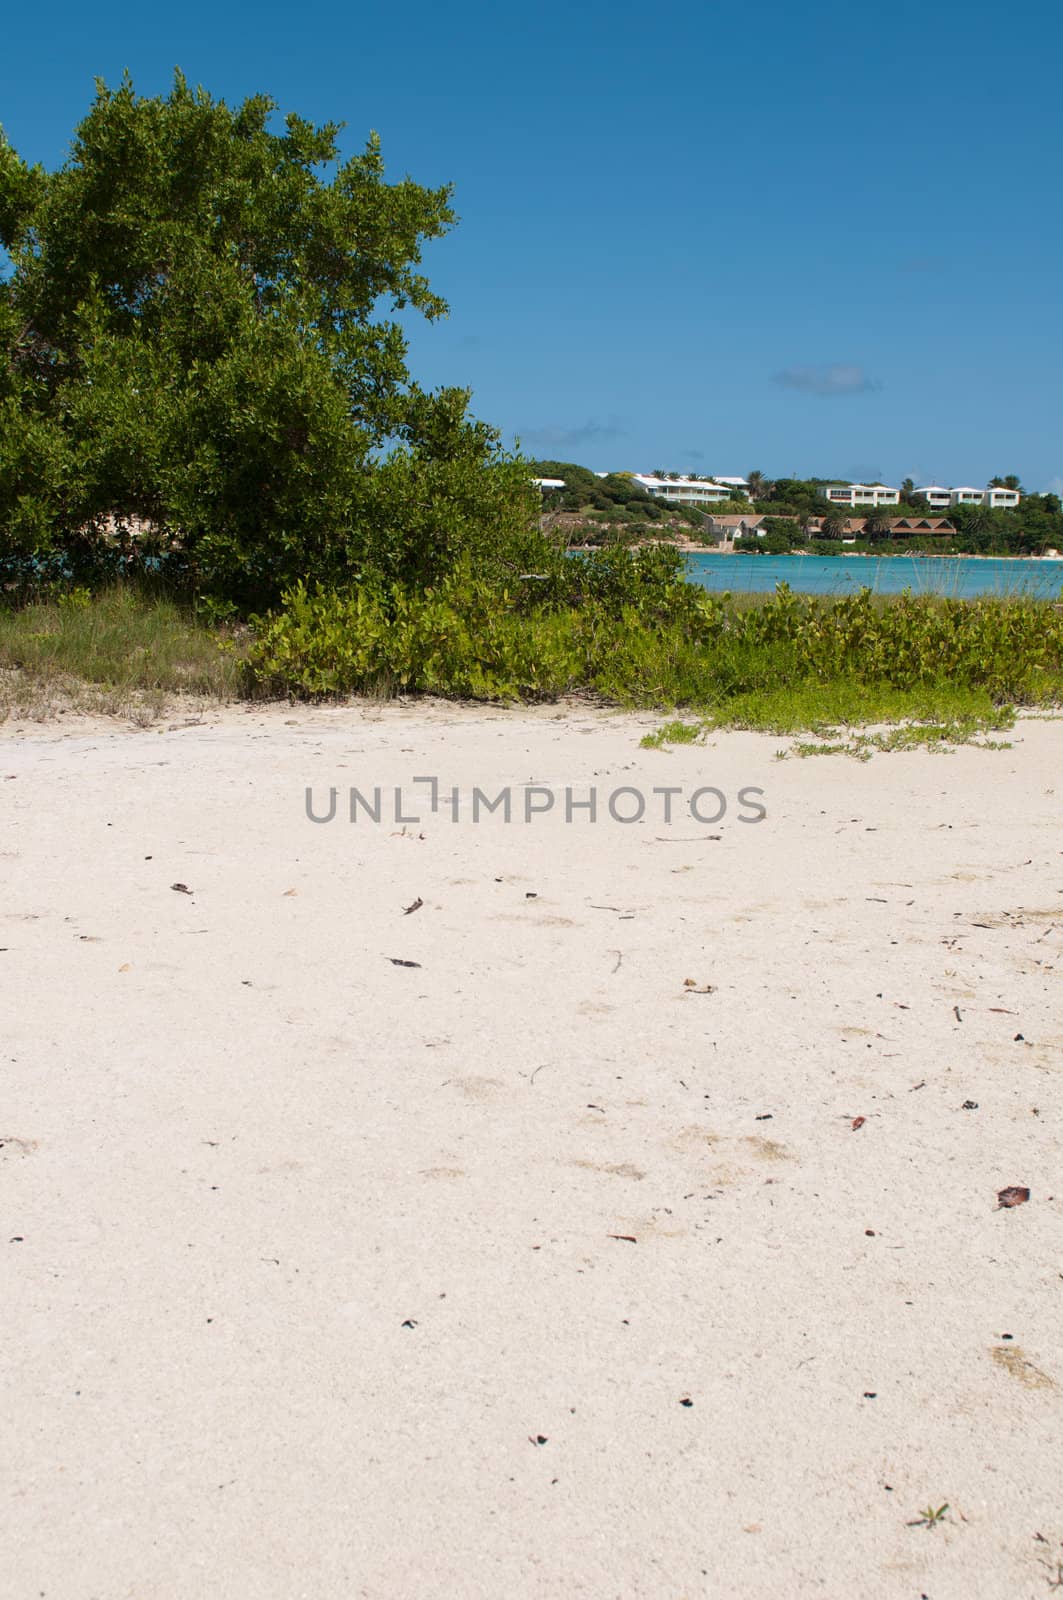 white sandy beach at Long Bay surrounded by tropical nature, Antigua